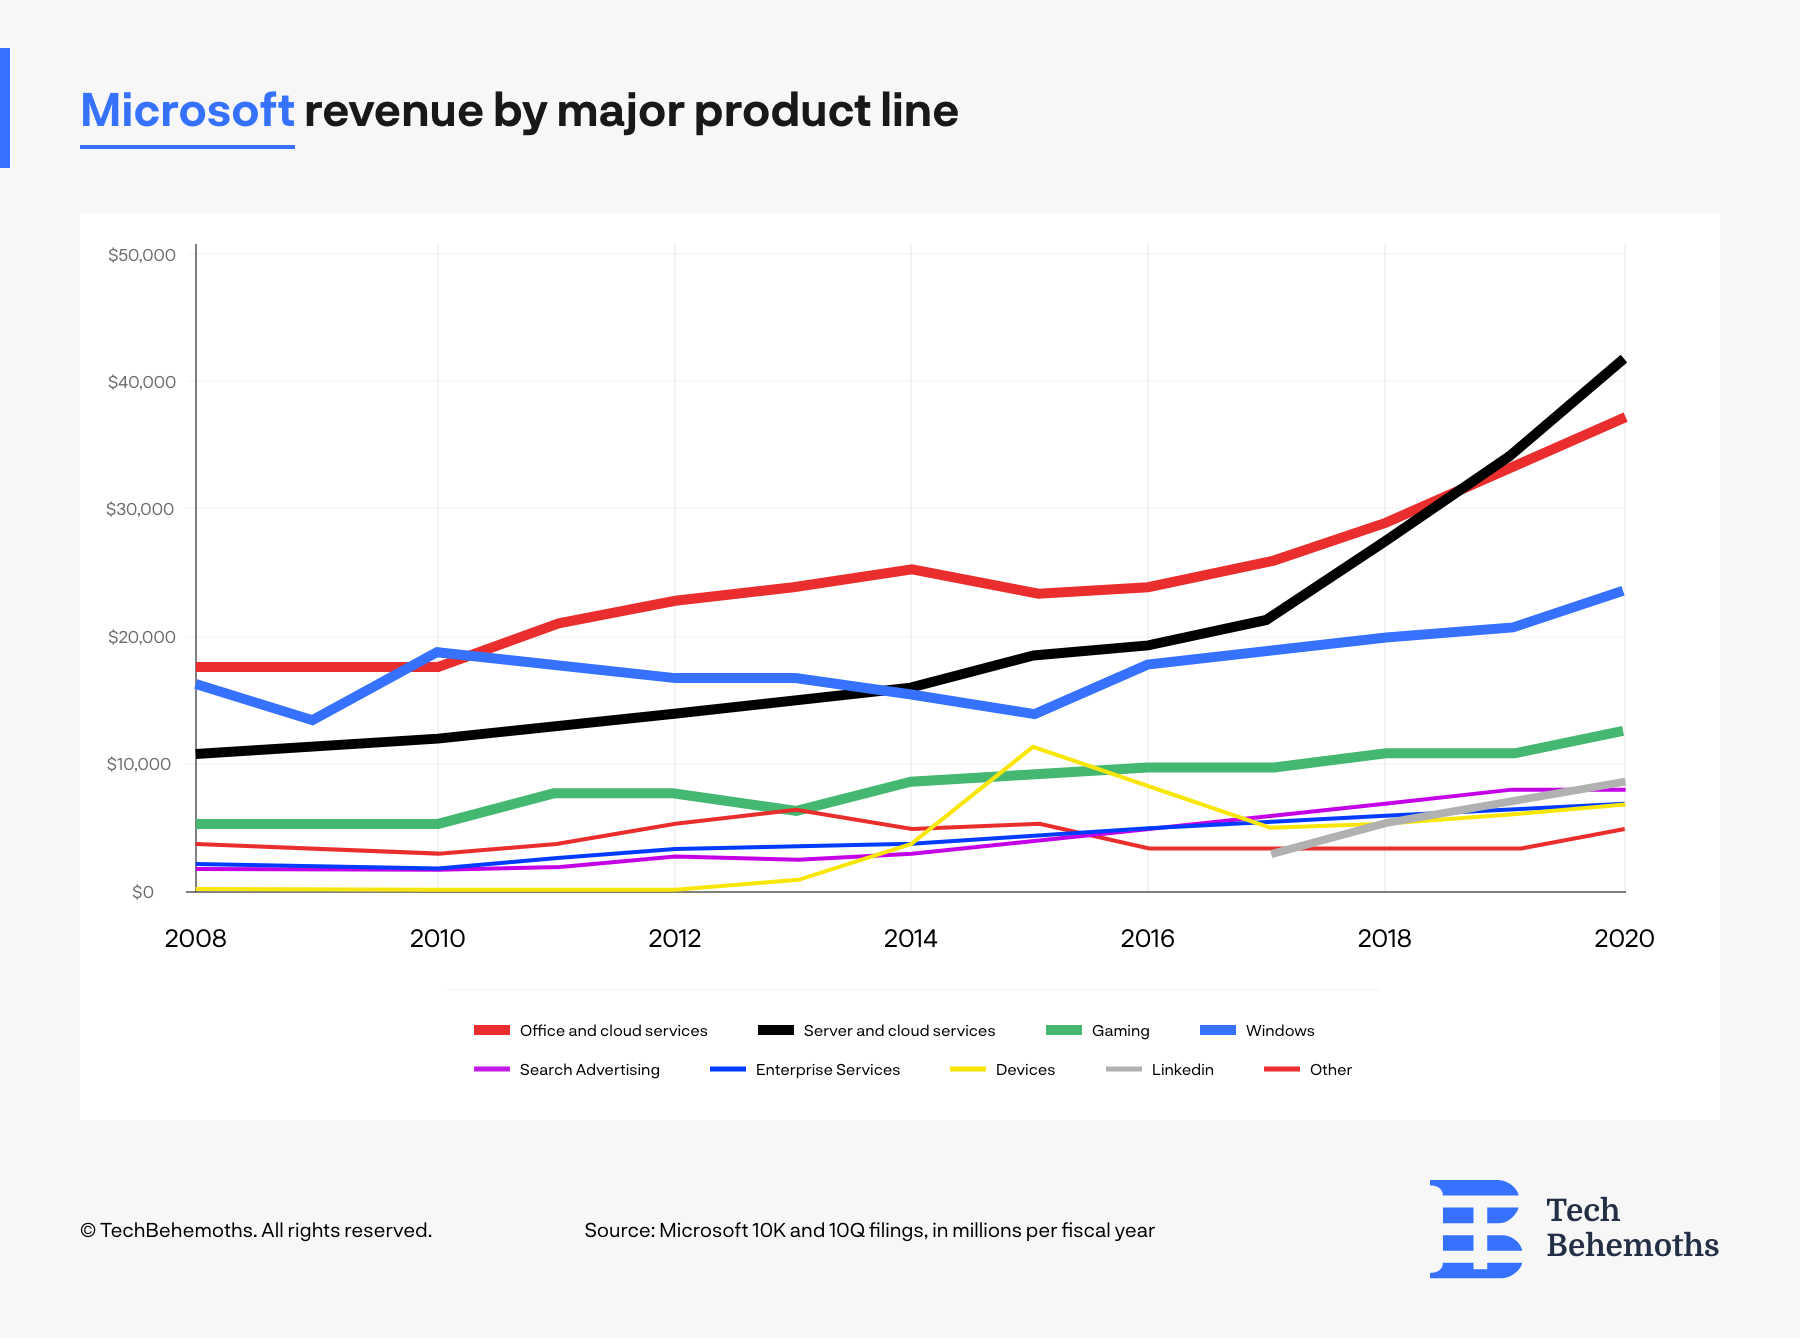 Microsoft revenue by major product line over the year